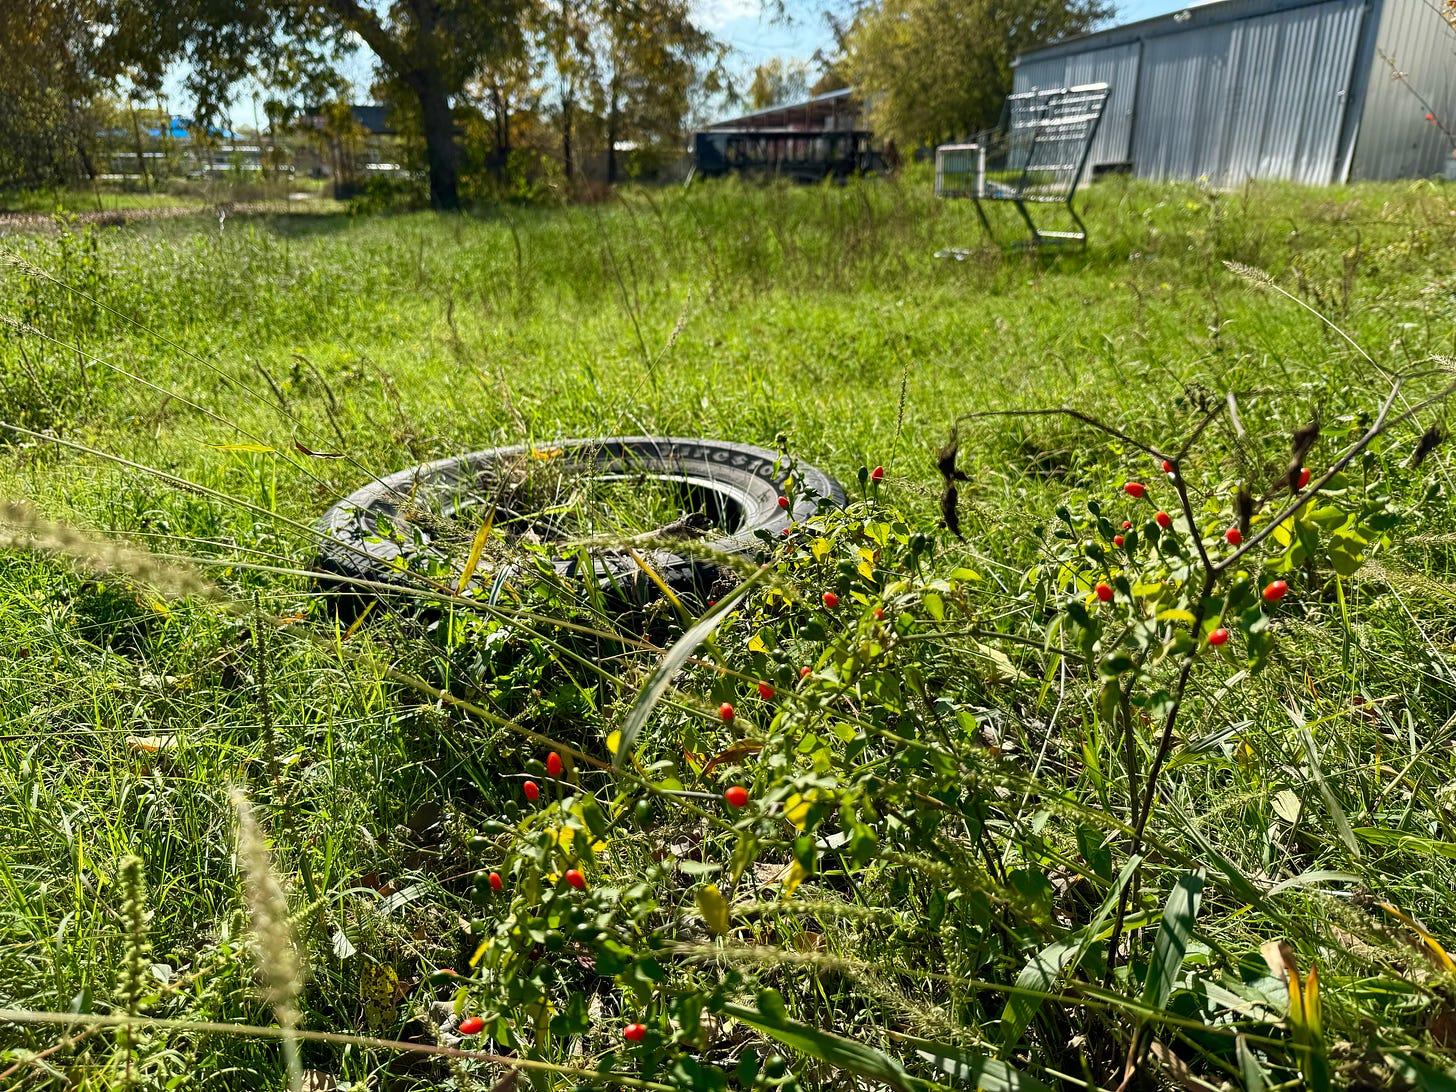 Chiltepin ripe for picking next to an old tire